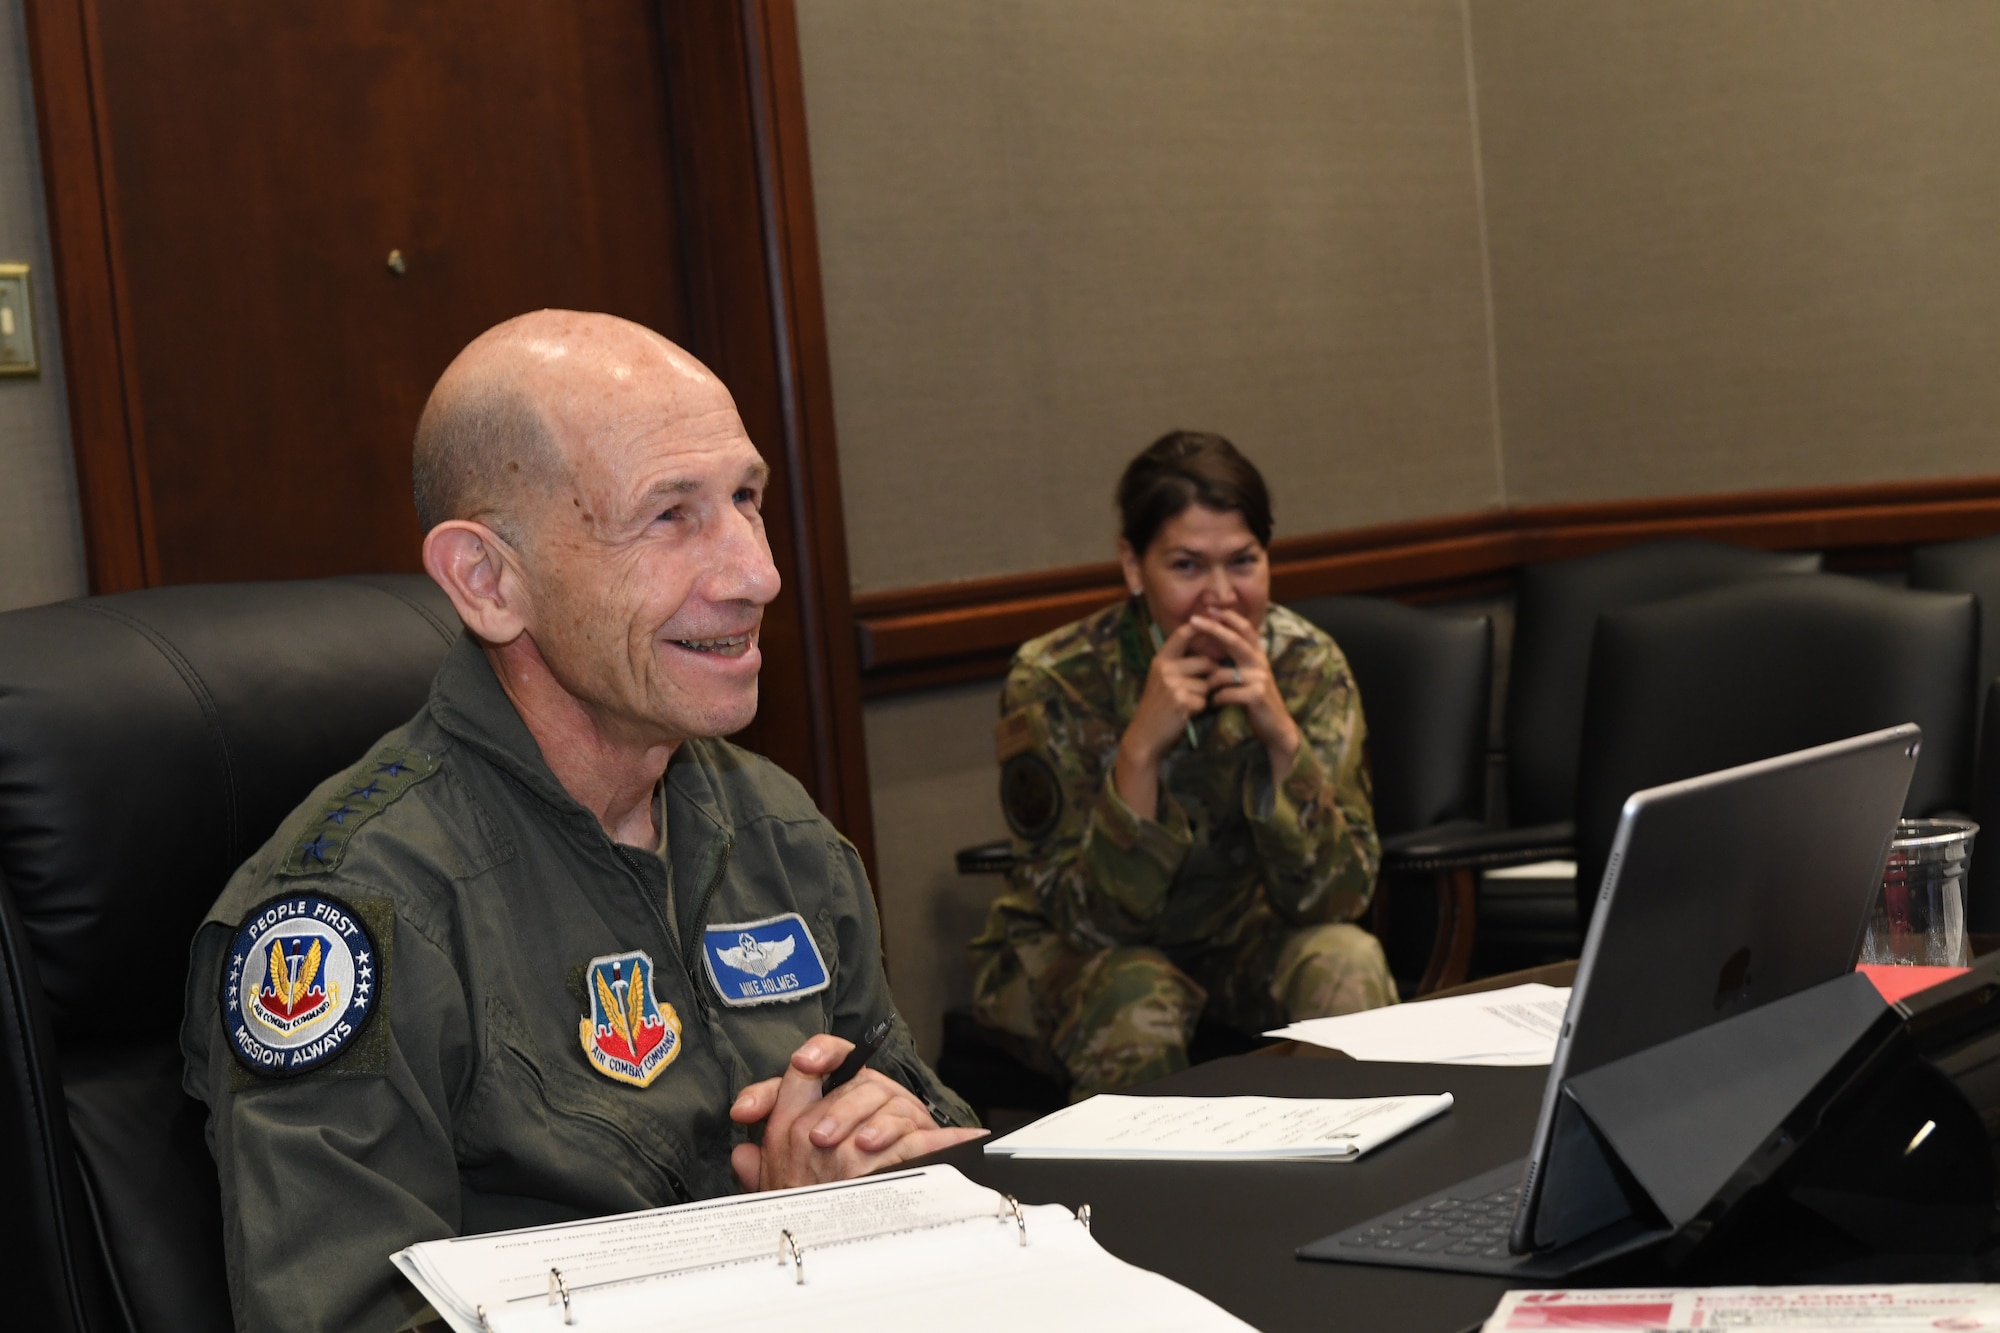 Gen. Mike Holmes, commander of Air Combat Command, smiles as he tells a story from when he was a young squadron commander during an outbrief for Sword Athena 2020 as part of a virtual Zoom call hosted by Air Combat Command Aug. 14, 2020 from Joint Base Langley-Eustis, Virginia. SA20 was a leadership symposium designed to develop rising leaders, across all enlisted and commissioned ranks, to focus on the female- and family-centric issues that impact readiness. (U.S. Air Force photo by Tech. Sgt. Nick Wilson)